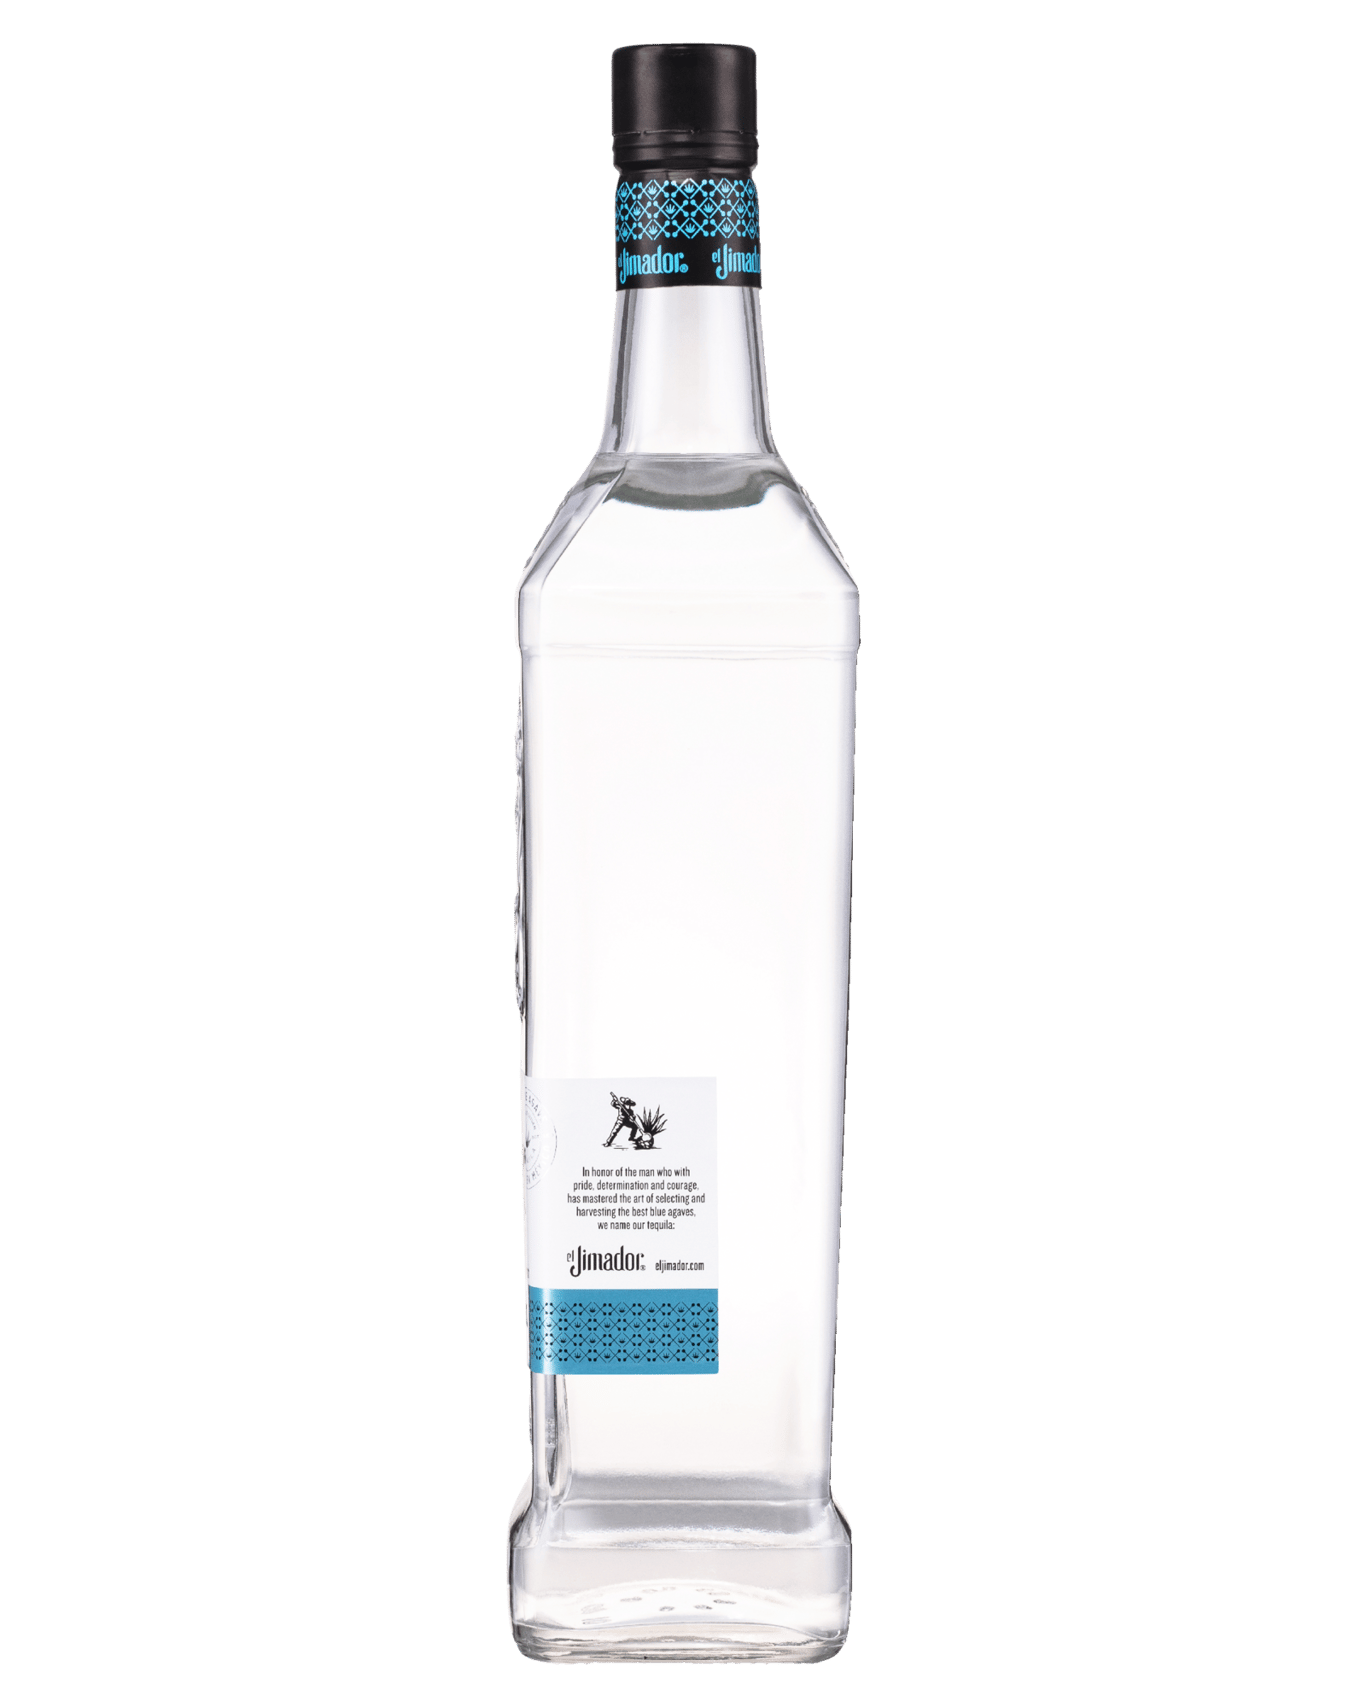 Buy El Jimador Tequila Blanco 1l Online or Near You in Australia [with ...